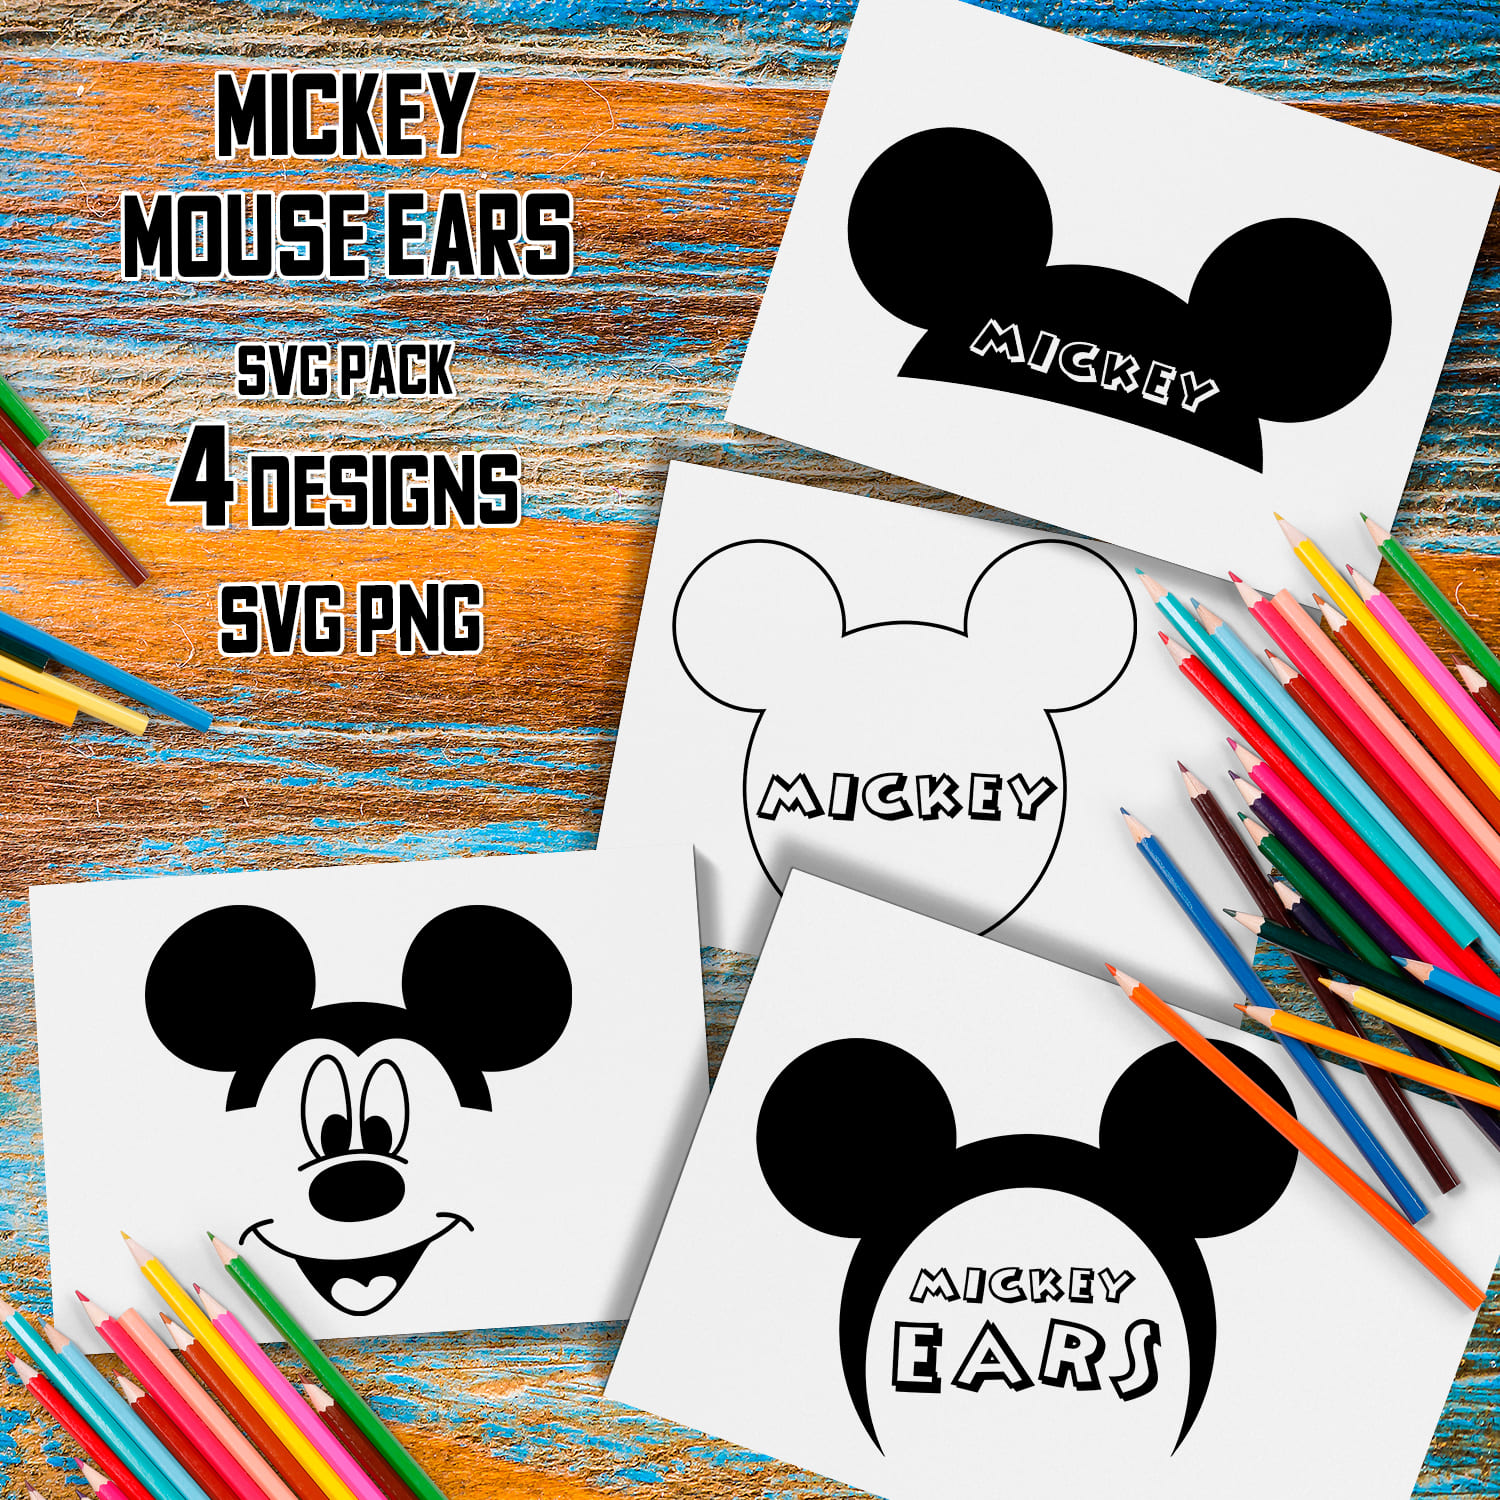 Mickey Mouse Ears SVG - main image preview.